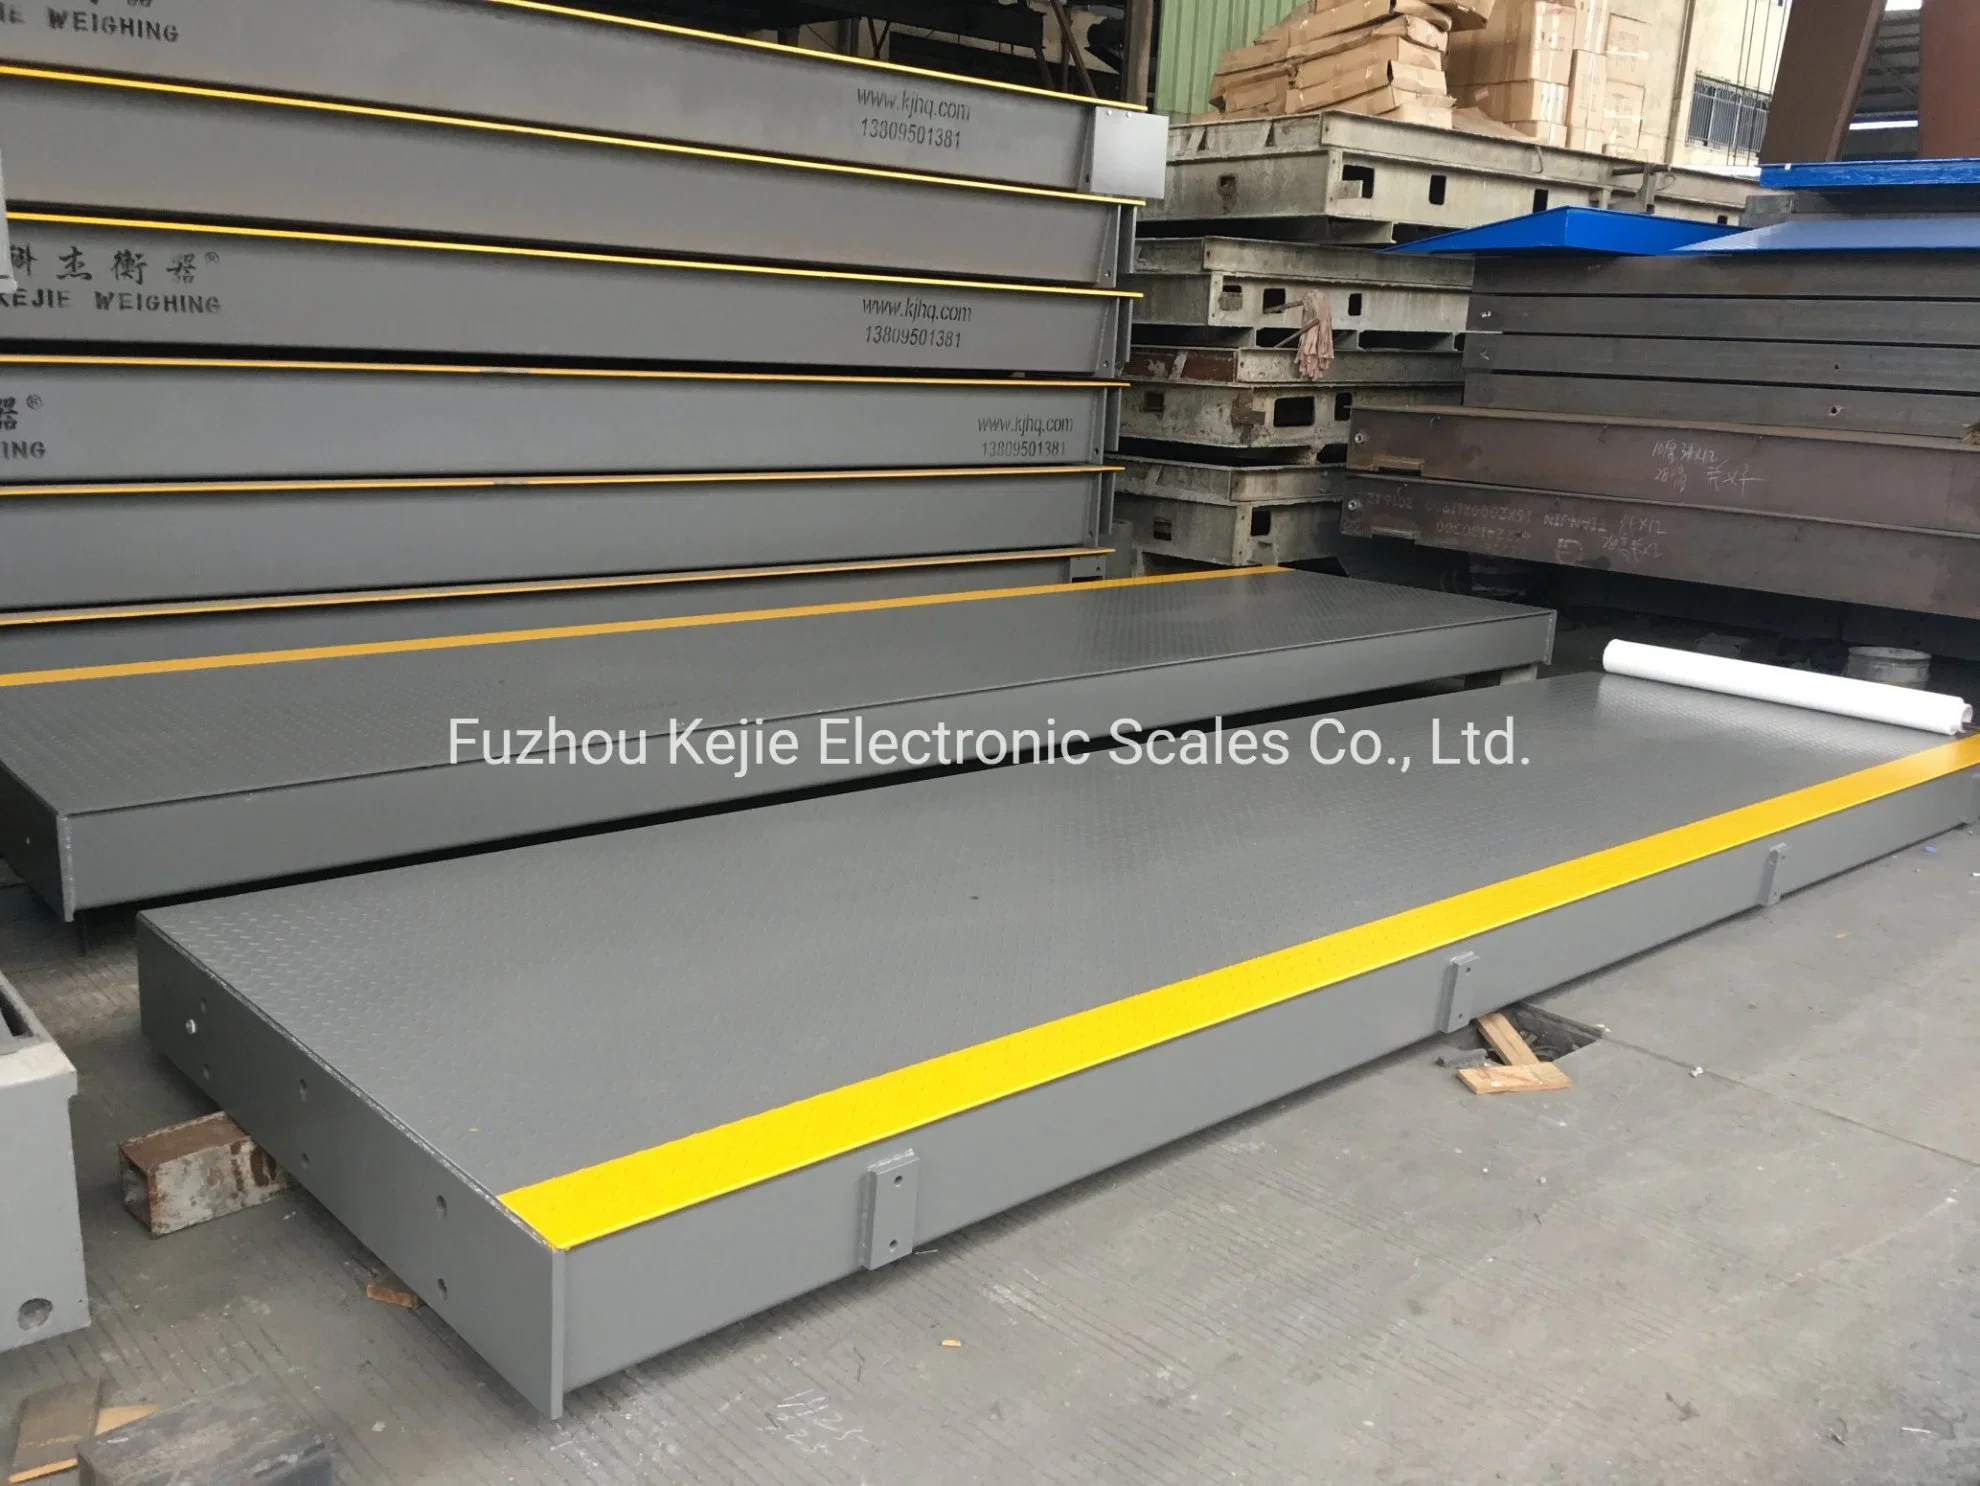 China Kejie Factory 3X20m/22m 100t Steel Deck Platform Weighbridge /Truck Scale with Weighing Controller for Industrial Application